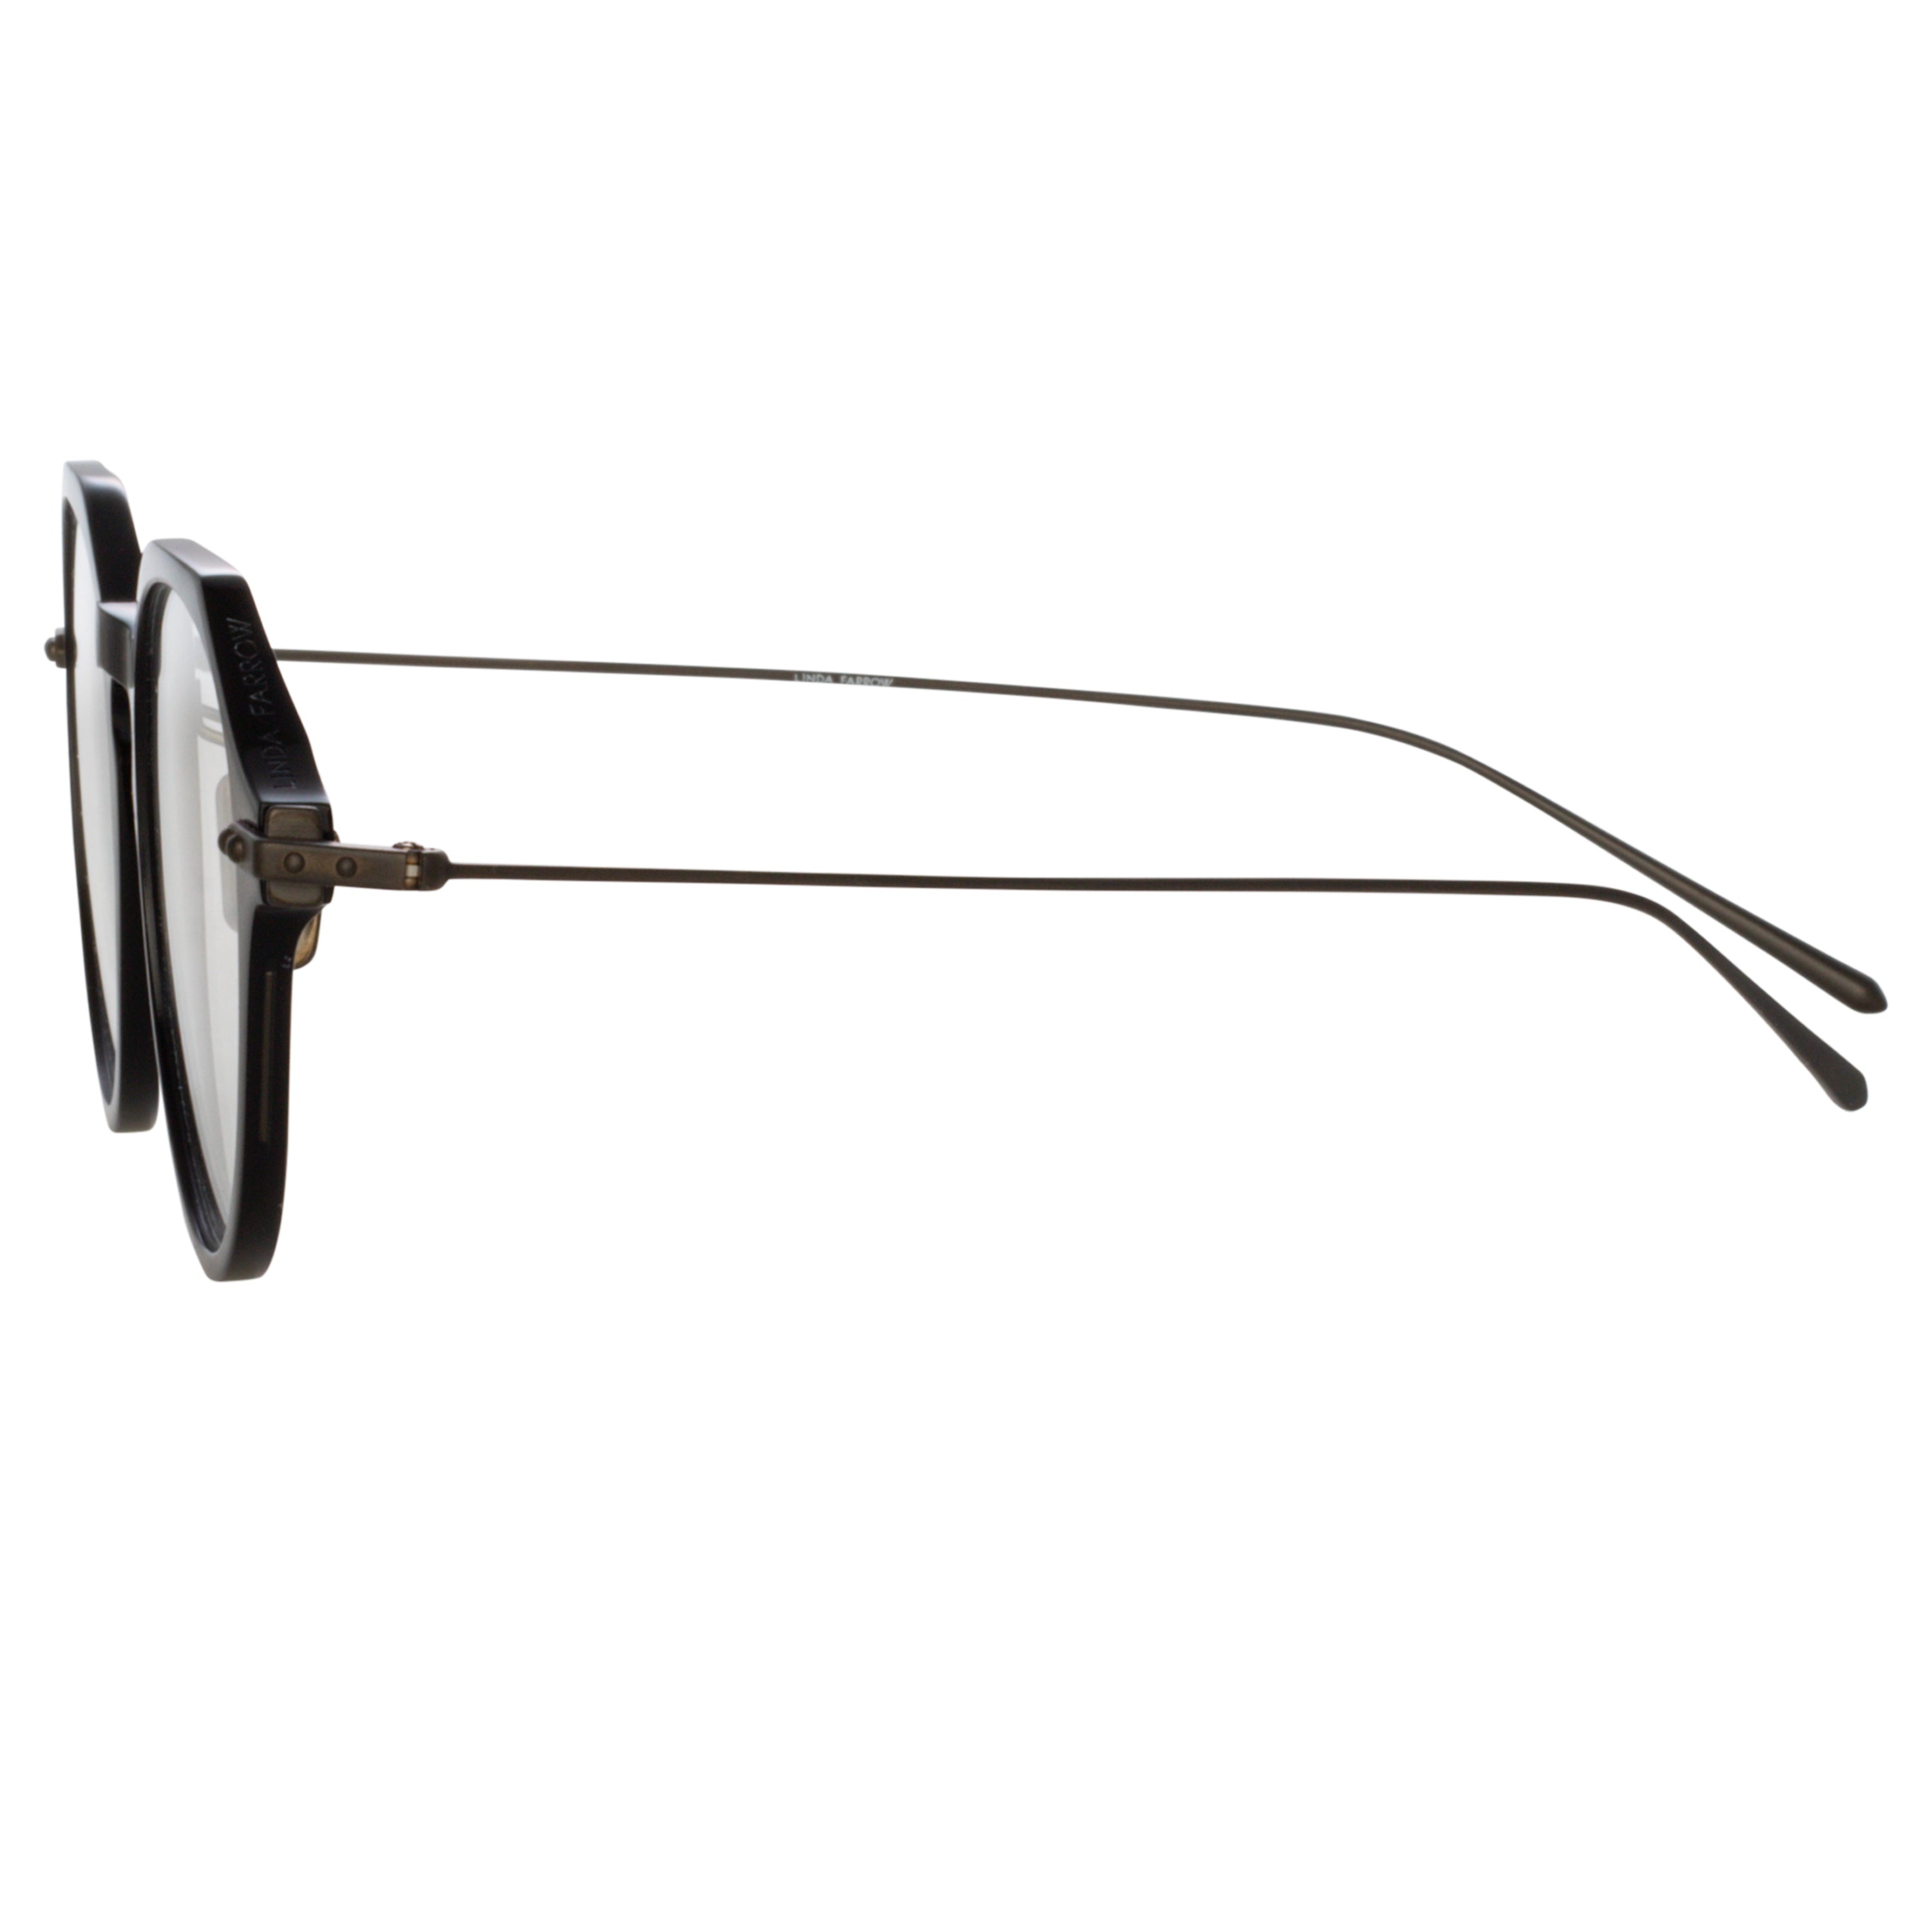 WREN OVAL OPTICAL A FRAME IN BLACK AND NICKEL - 4